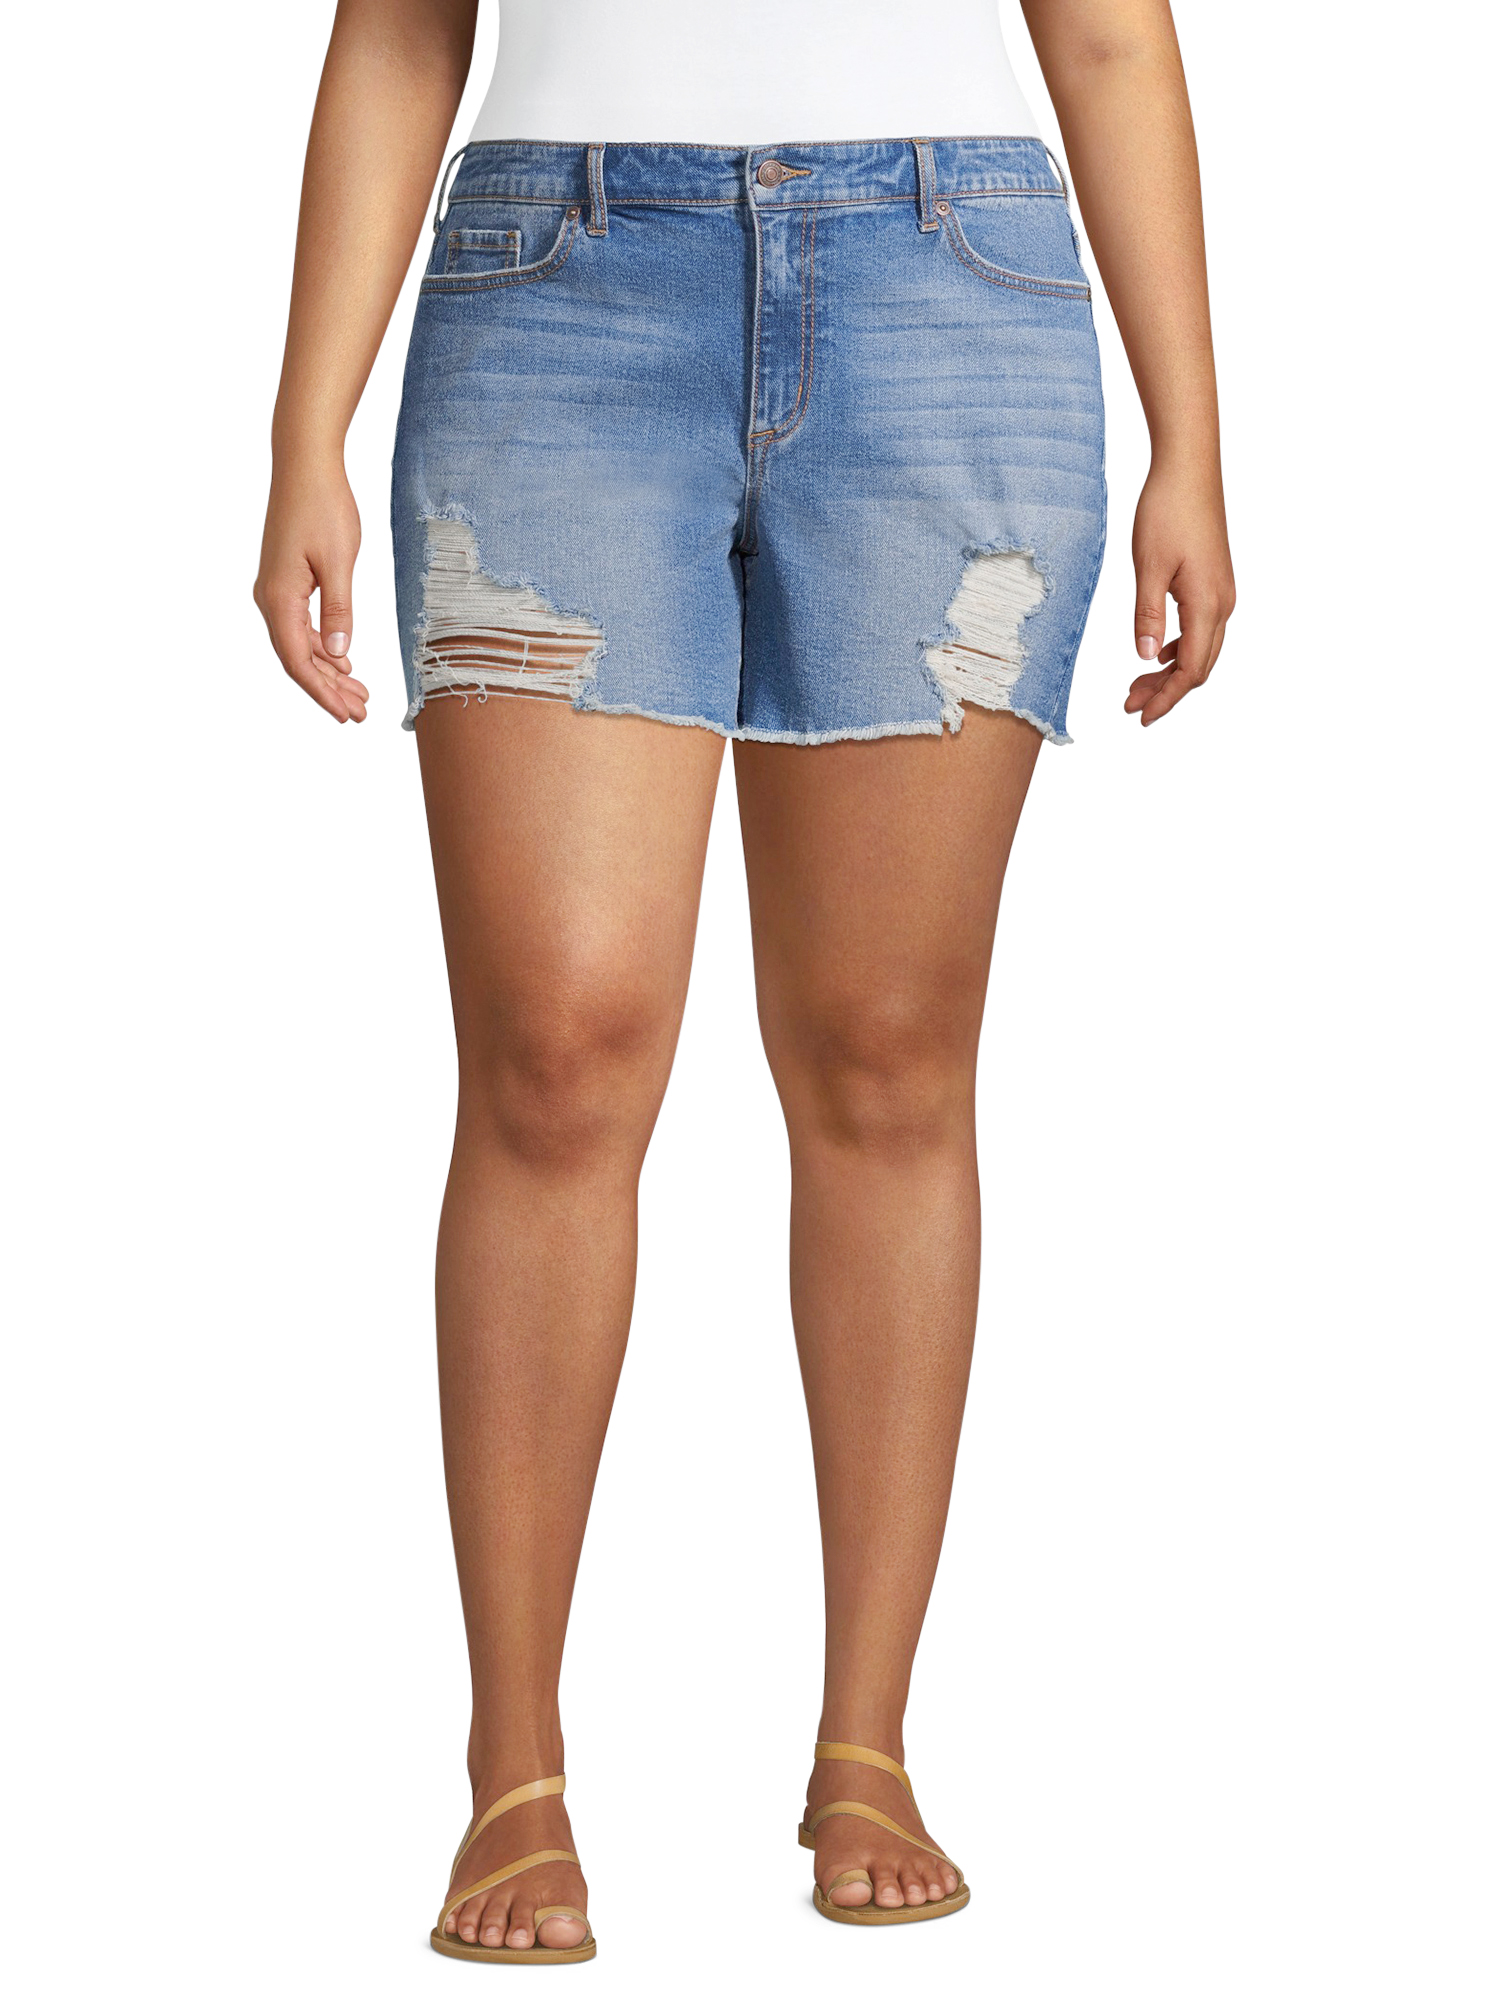 Sofia Jeans Women's Lila Mid Rise Destructed Short - image 4 of 9